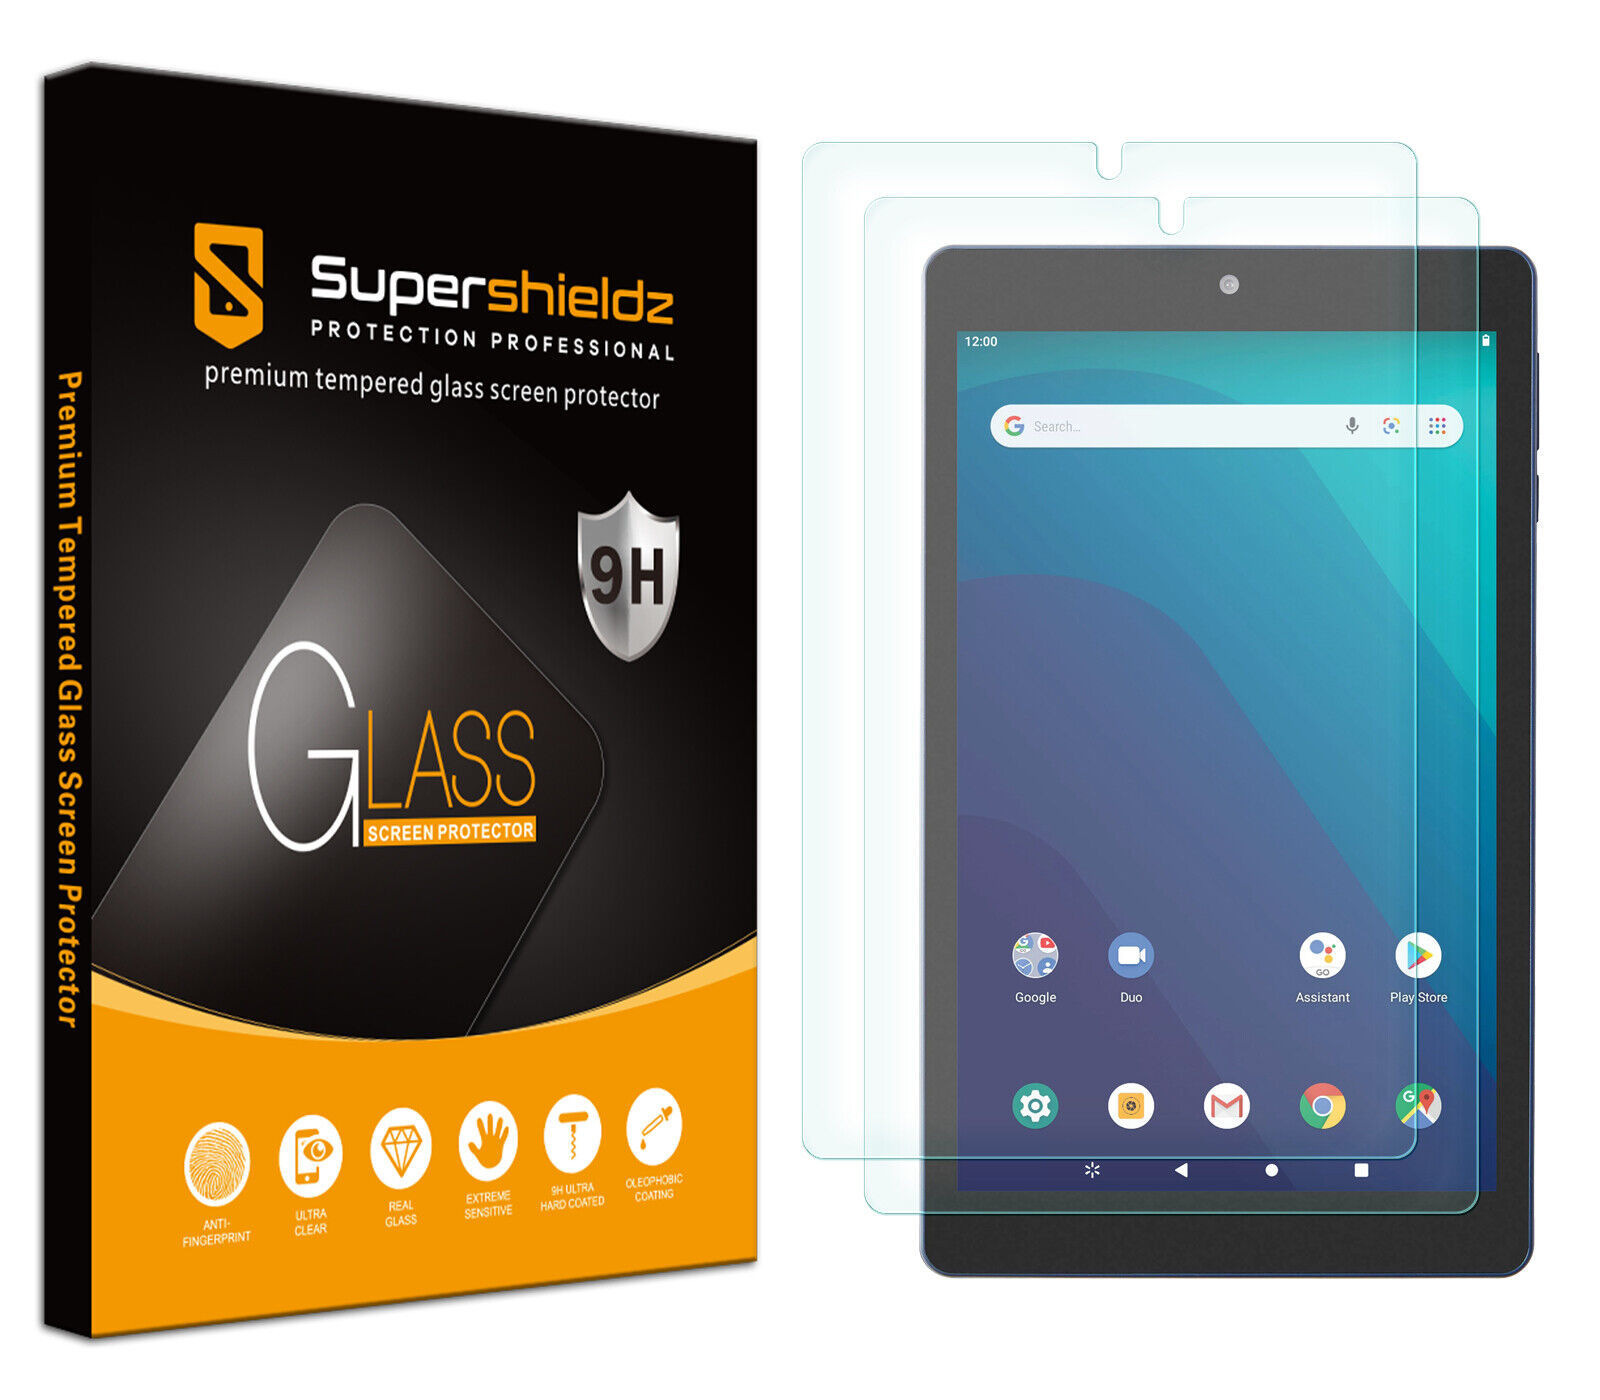 2X Supershieldz Tempered Glass Screen Protector for Onn 8" Tablet Gen 3 (2022) - $21.99